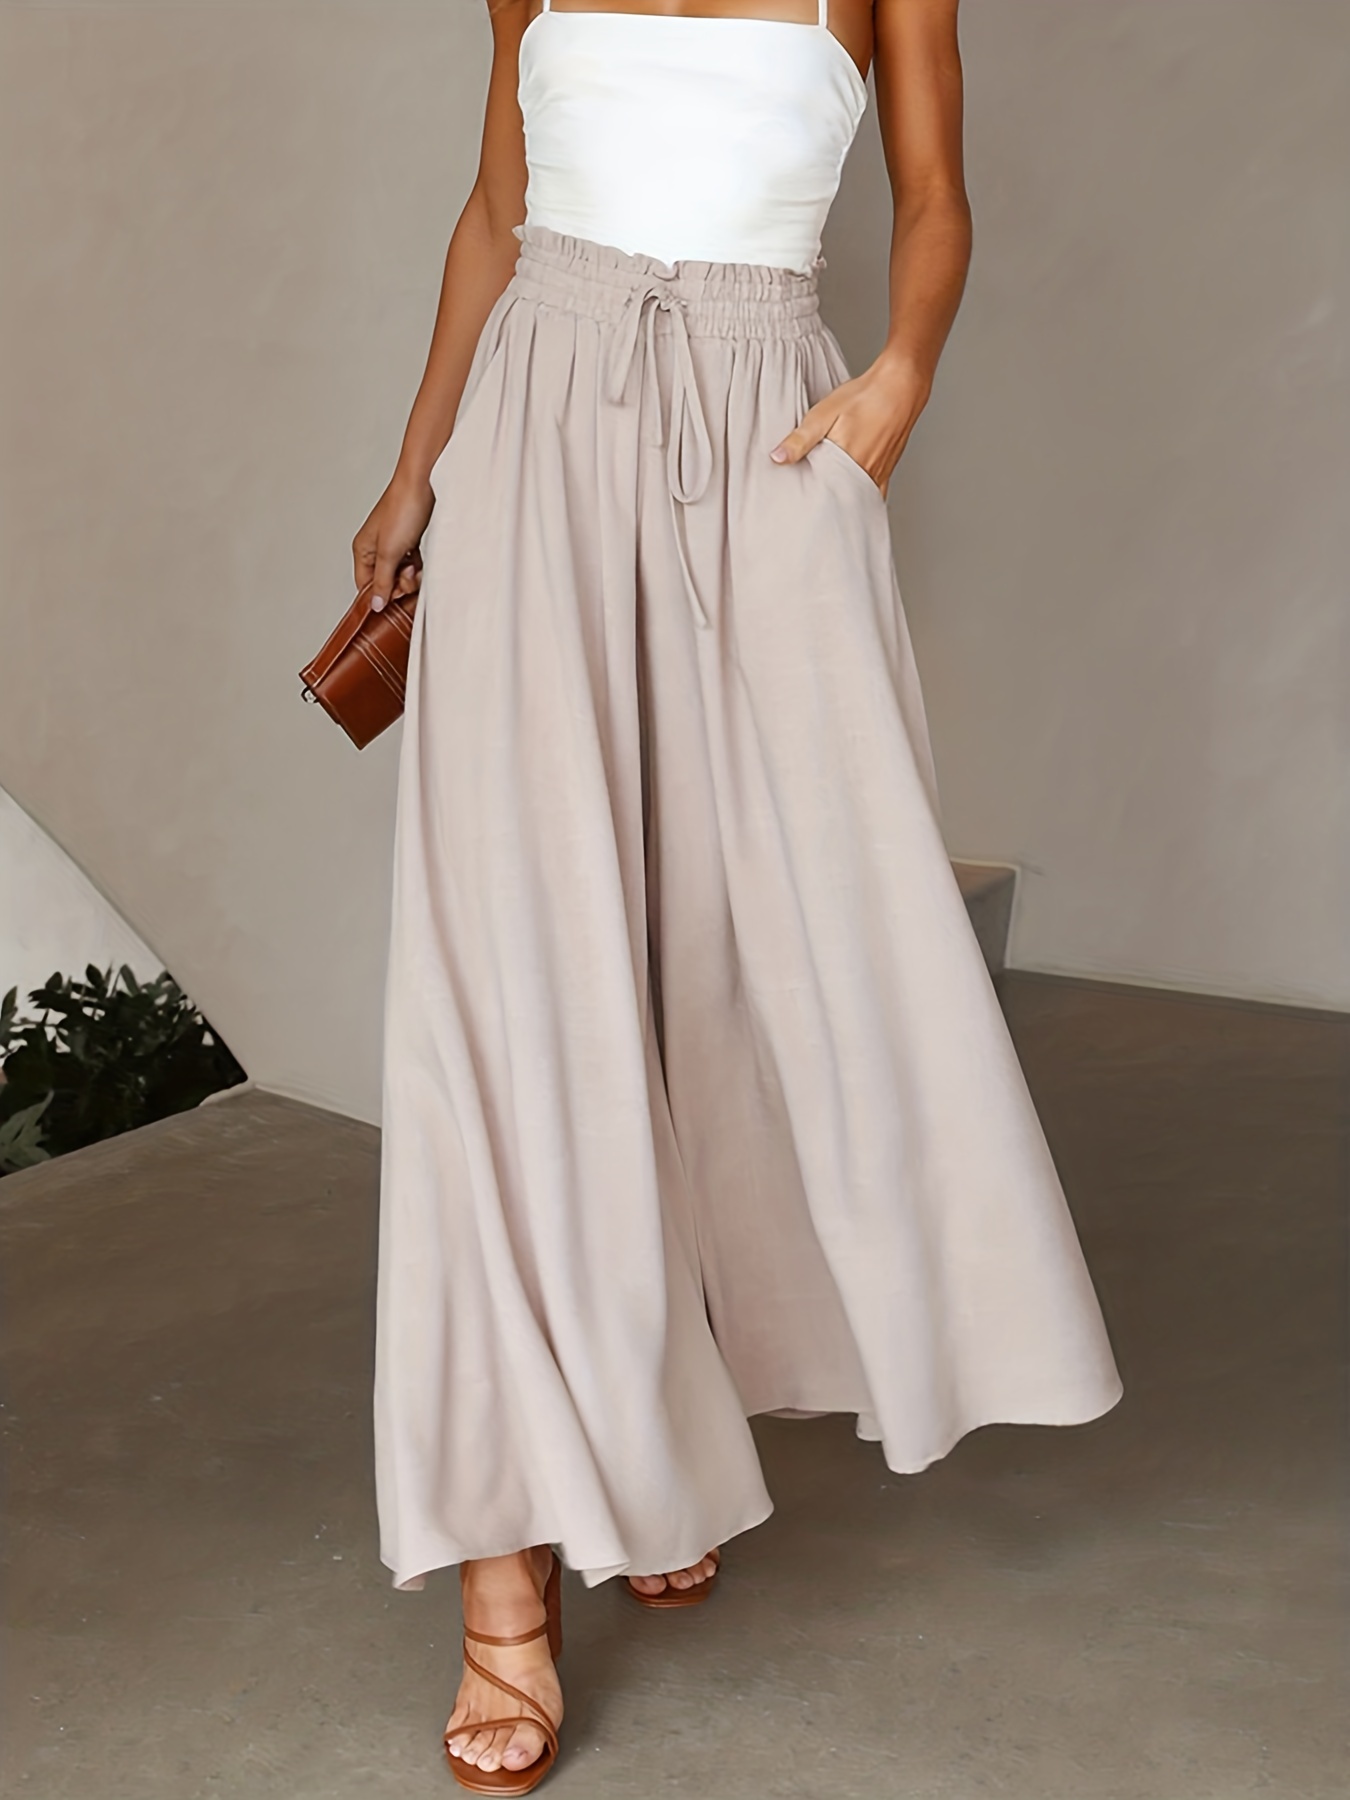 Palazzo Pants for Women Summer Casual Flowy Trousers Solid Color High  Waisted Wide Leg Long Pants with Drawstring 